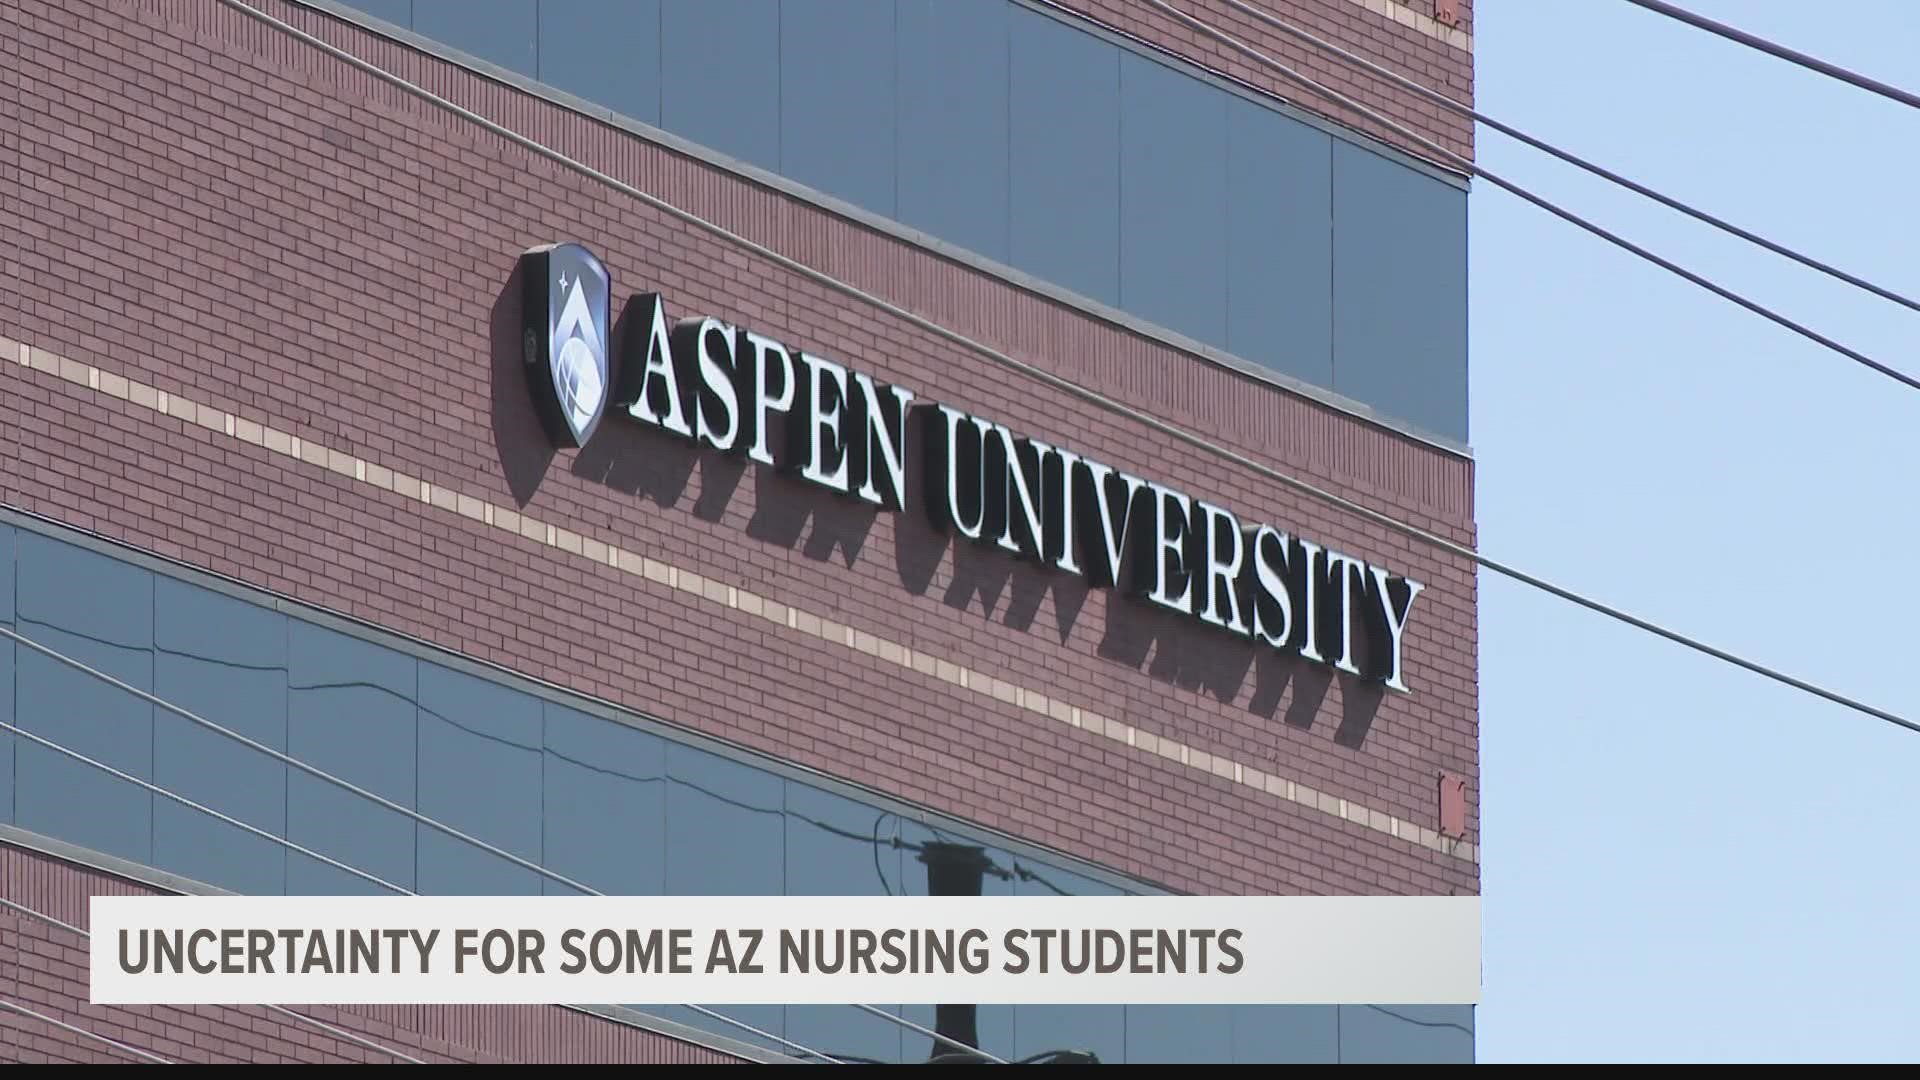 An investigation by the Arizona State Board of Nursing believes Aspen University's poor NCLEX test scores are due to several issues. The university disagrees.